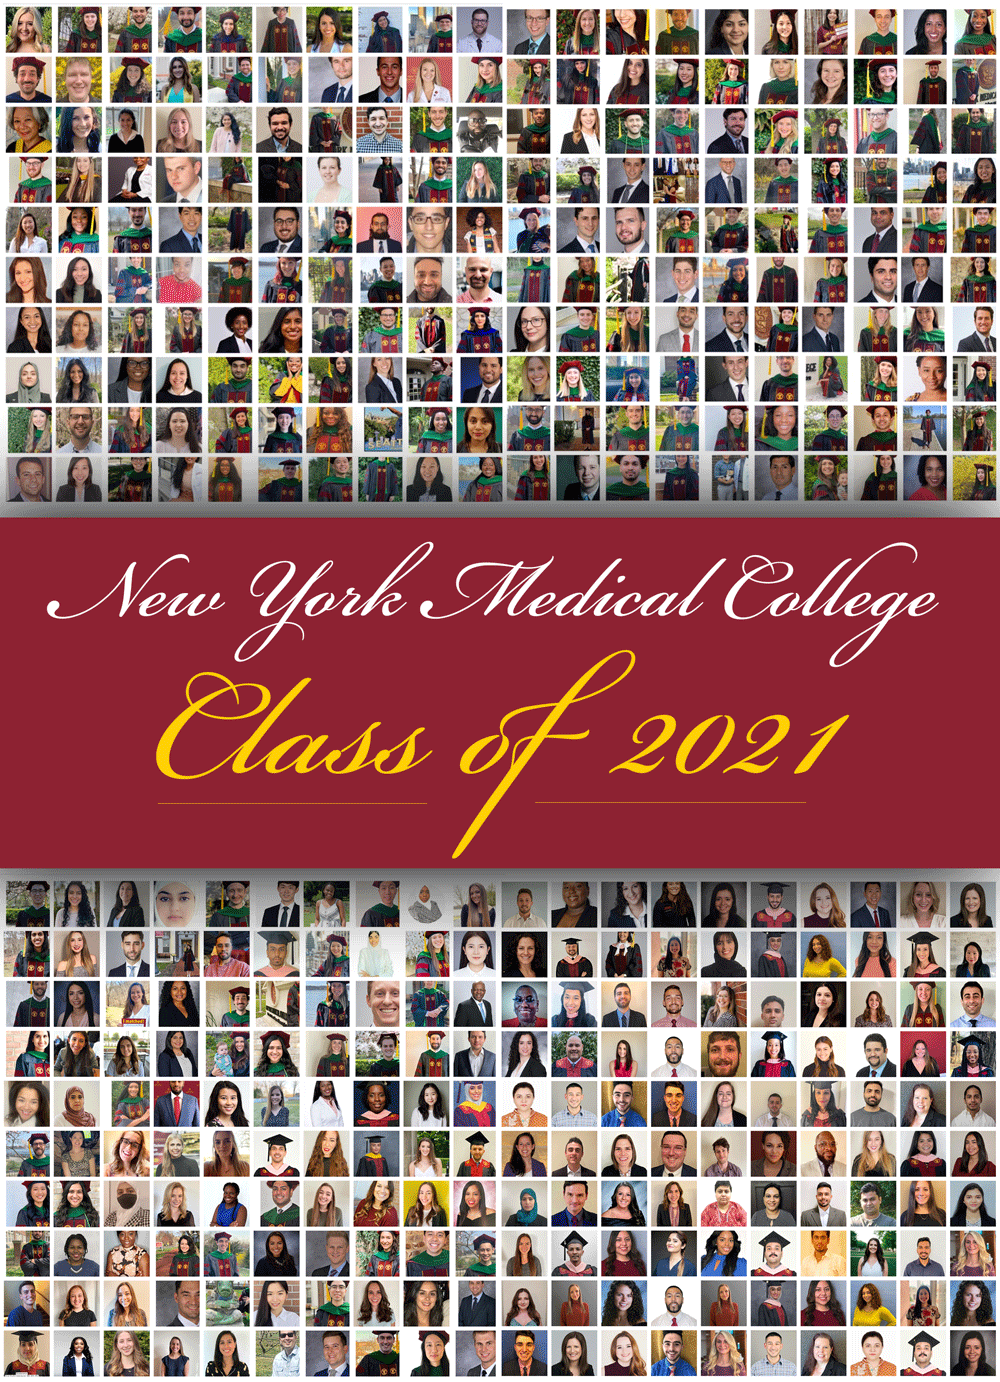 Class of 2021 Commencement Collage yearbook-like front cover 